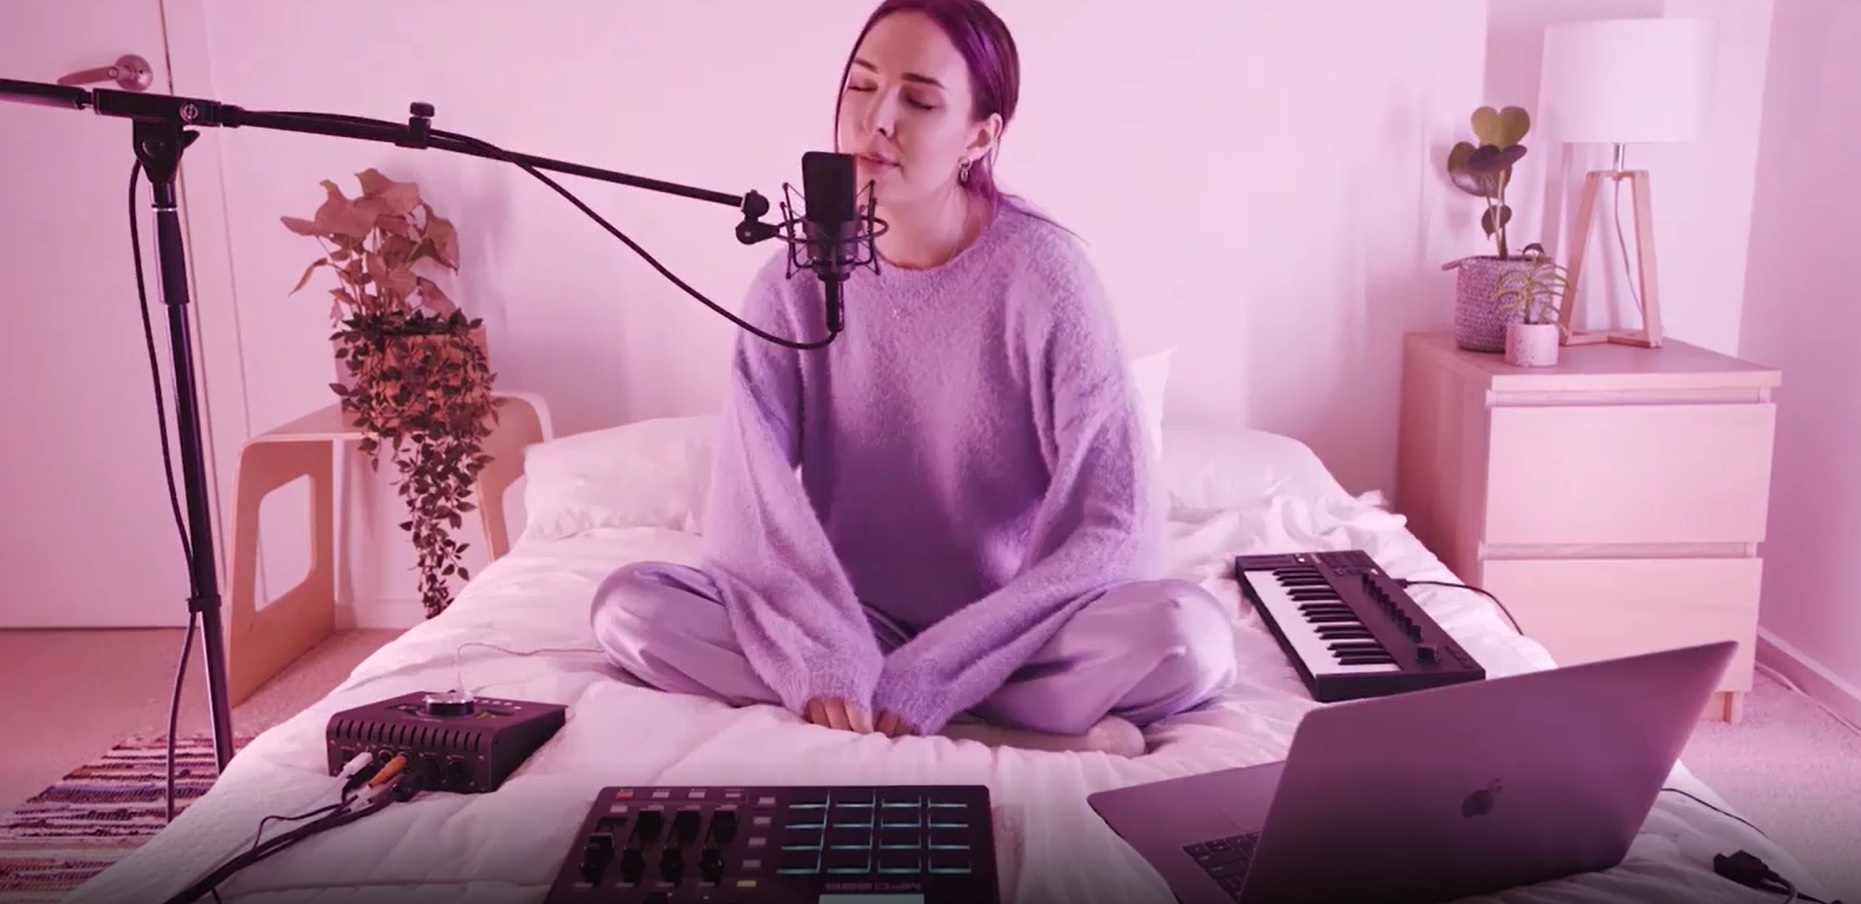 Watch Hartley Perform Two Songs From Her Bed For Rolling Stone's 'In My Room'